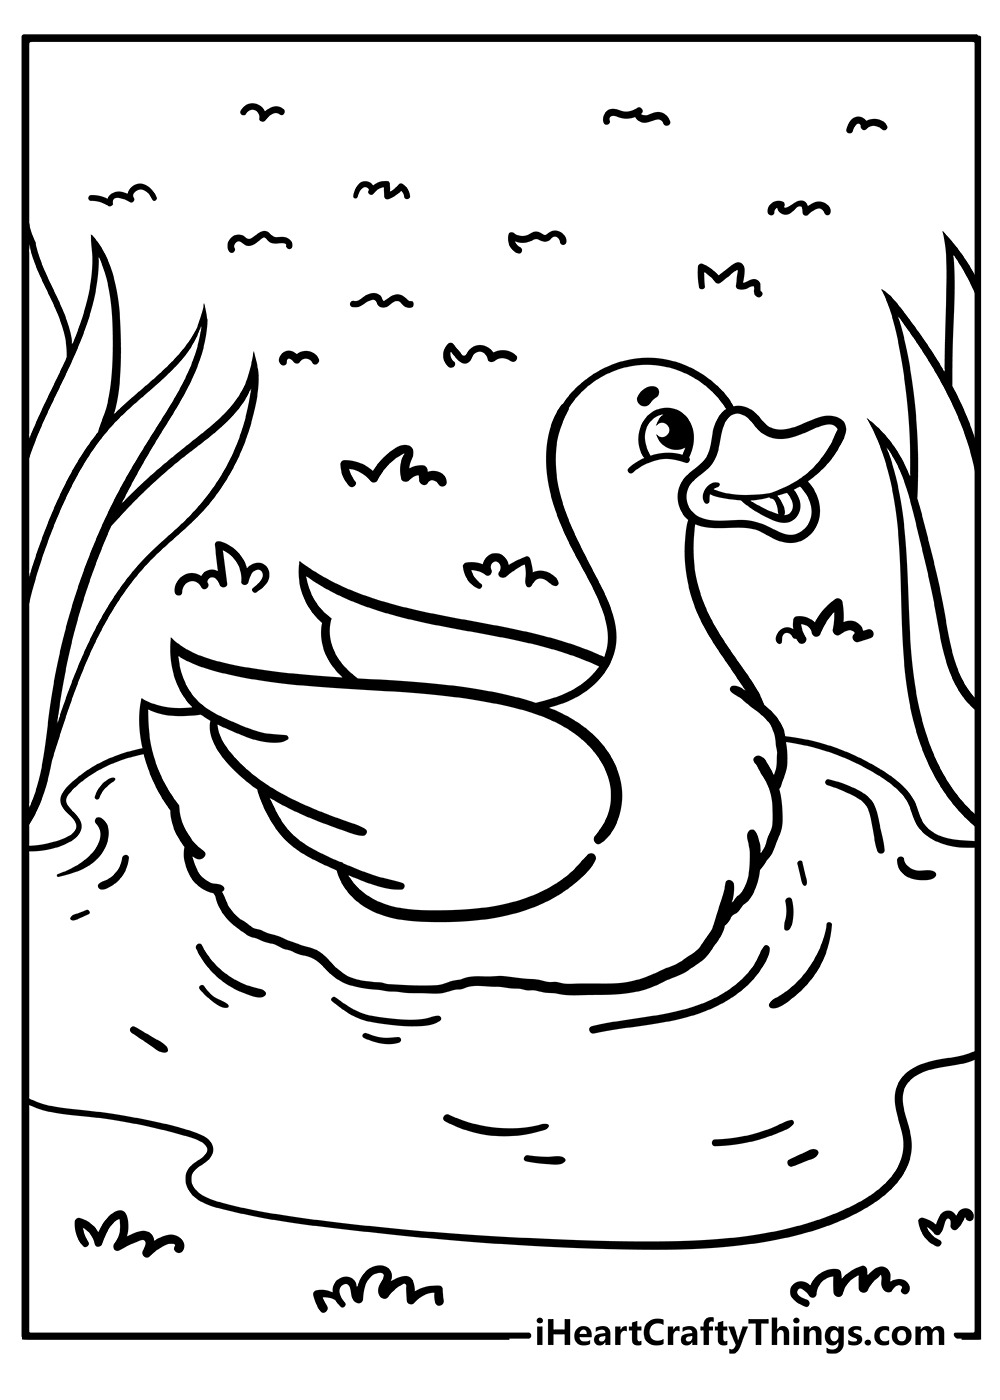 Farm Animal Coloring Pages for adults free printable